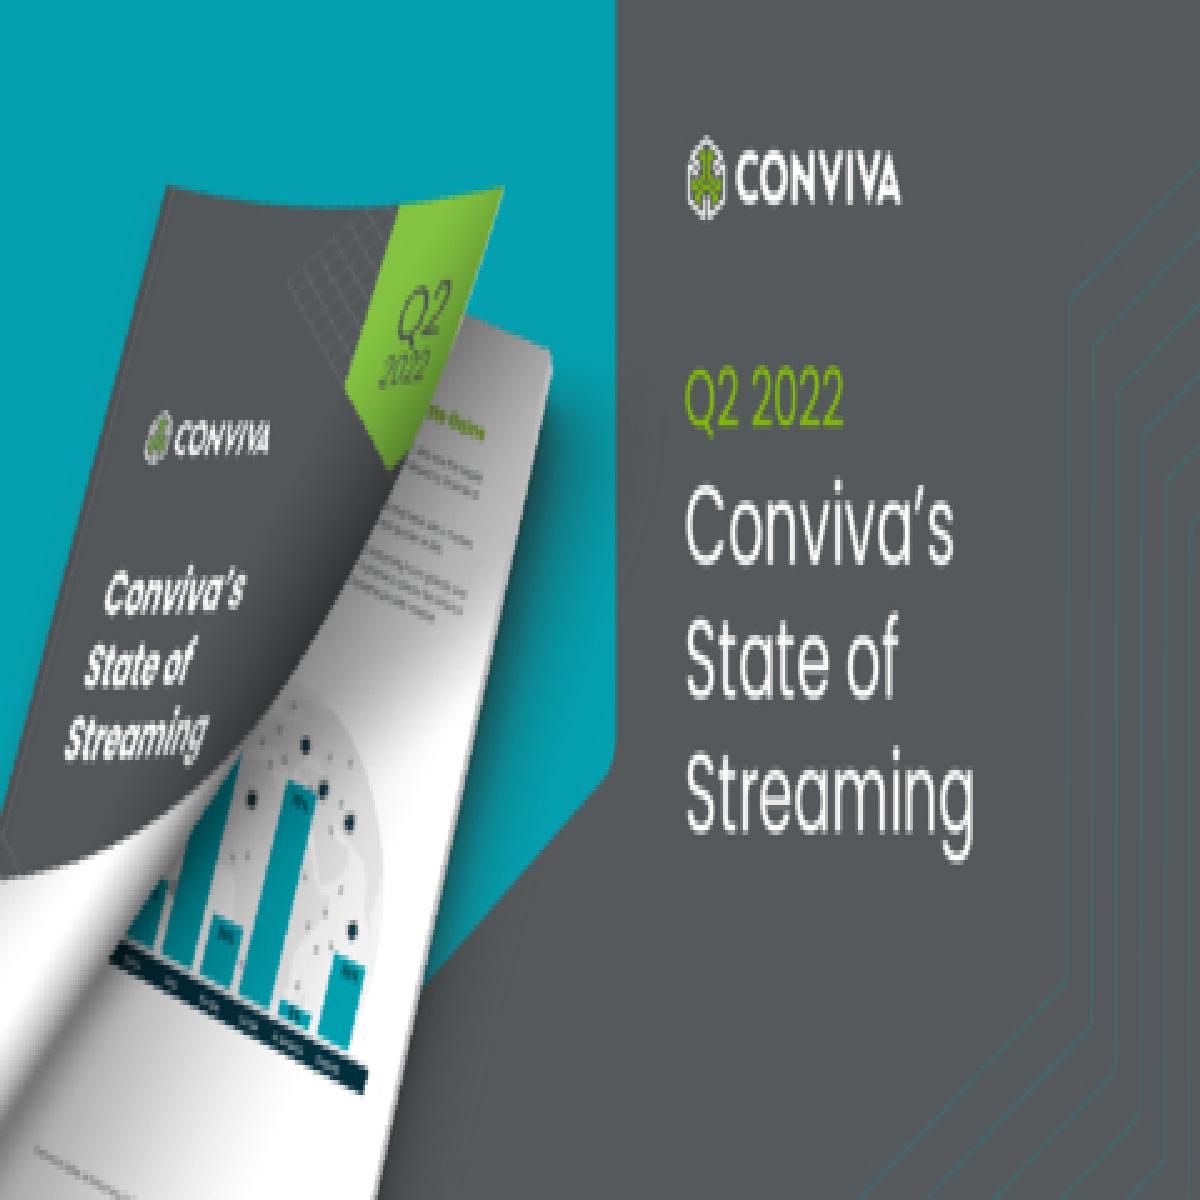 Worldwide Streaming Market Achieves Double-digit Growth in Q2 2022; Smart TVs and Roku Dominate Global Viewing According to Conviva